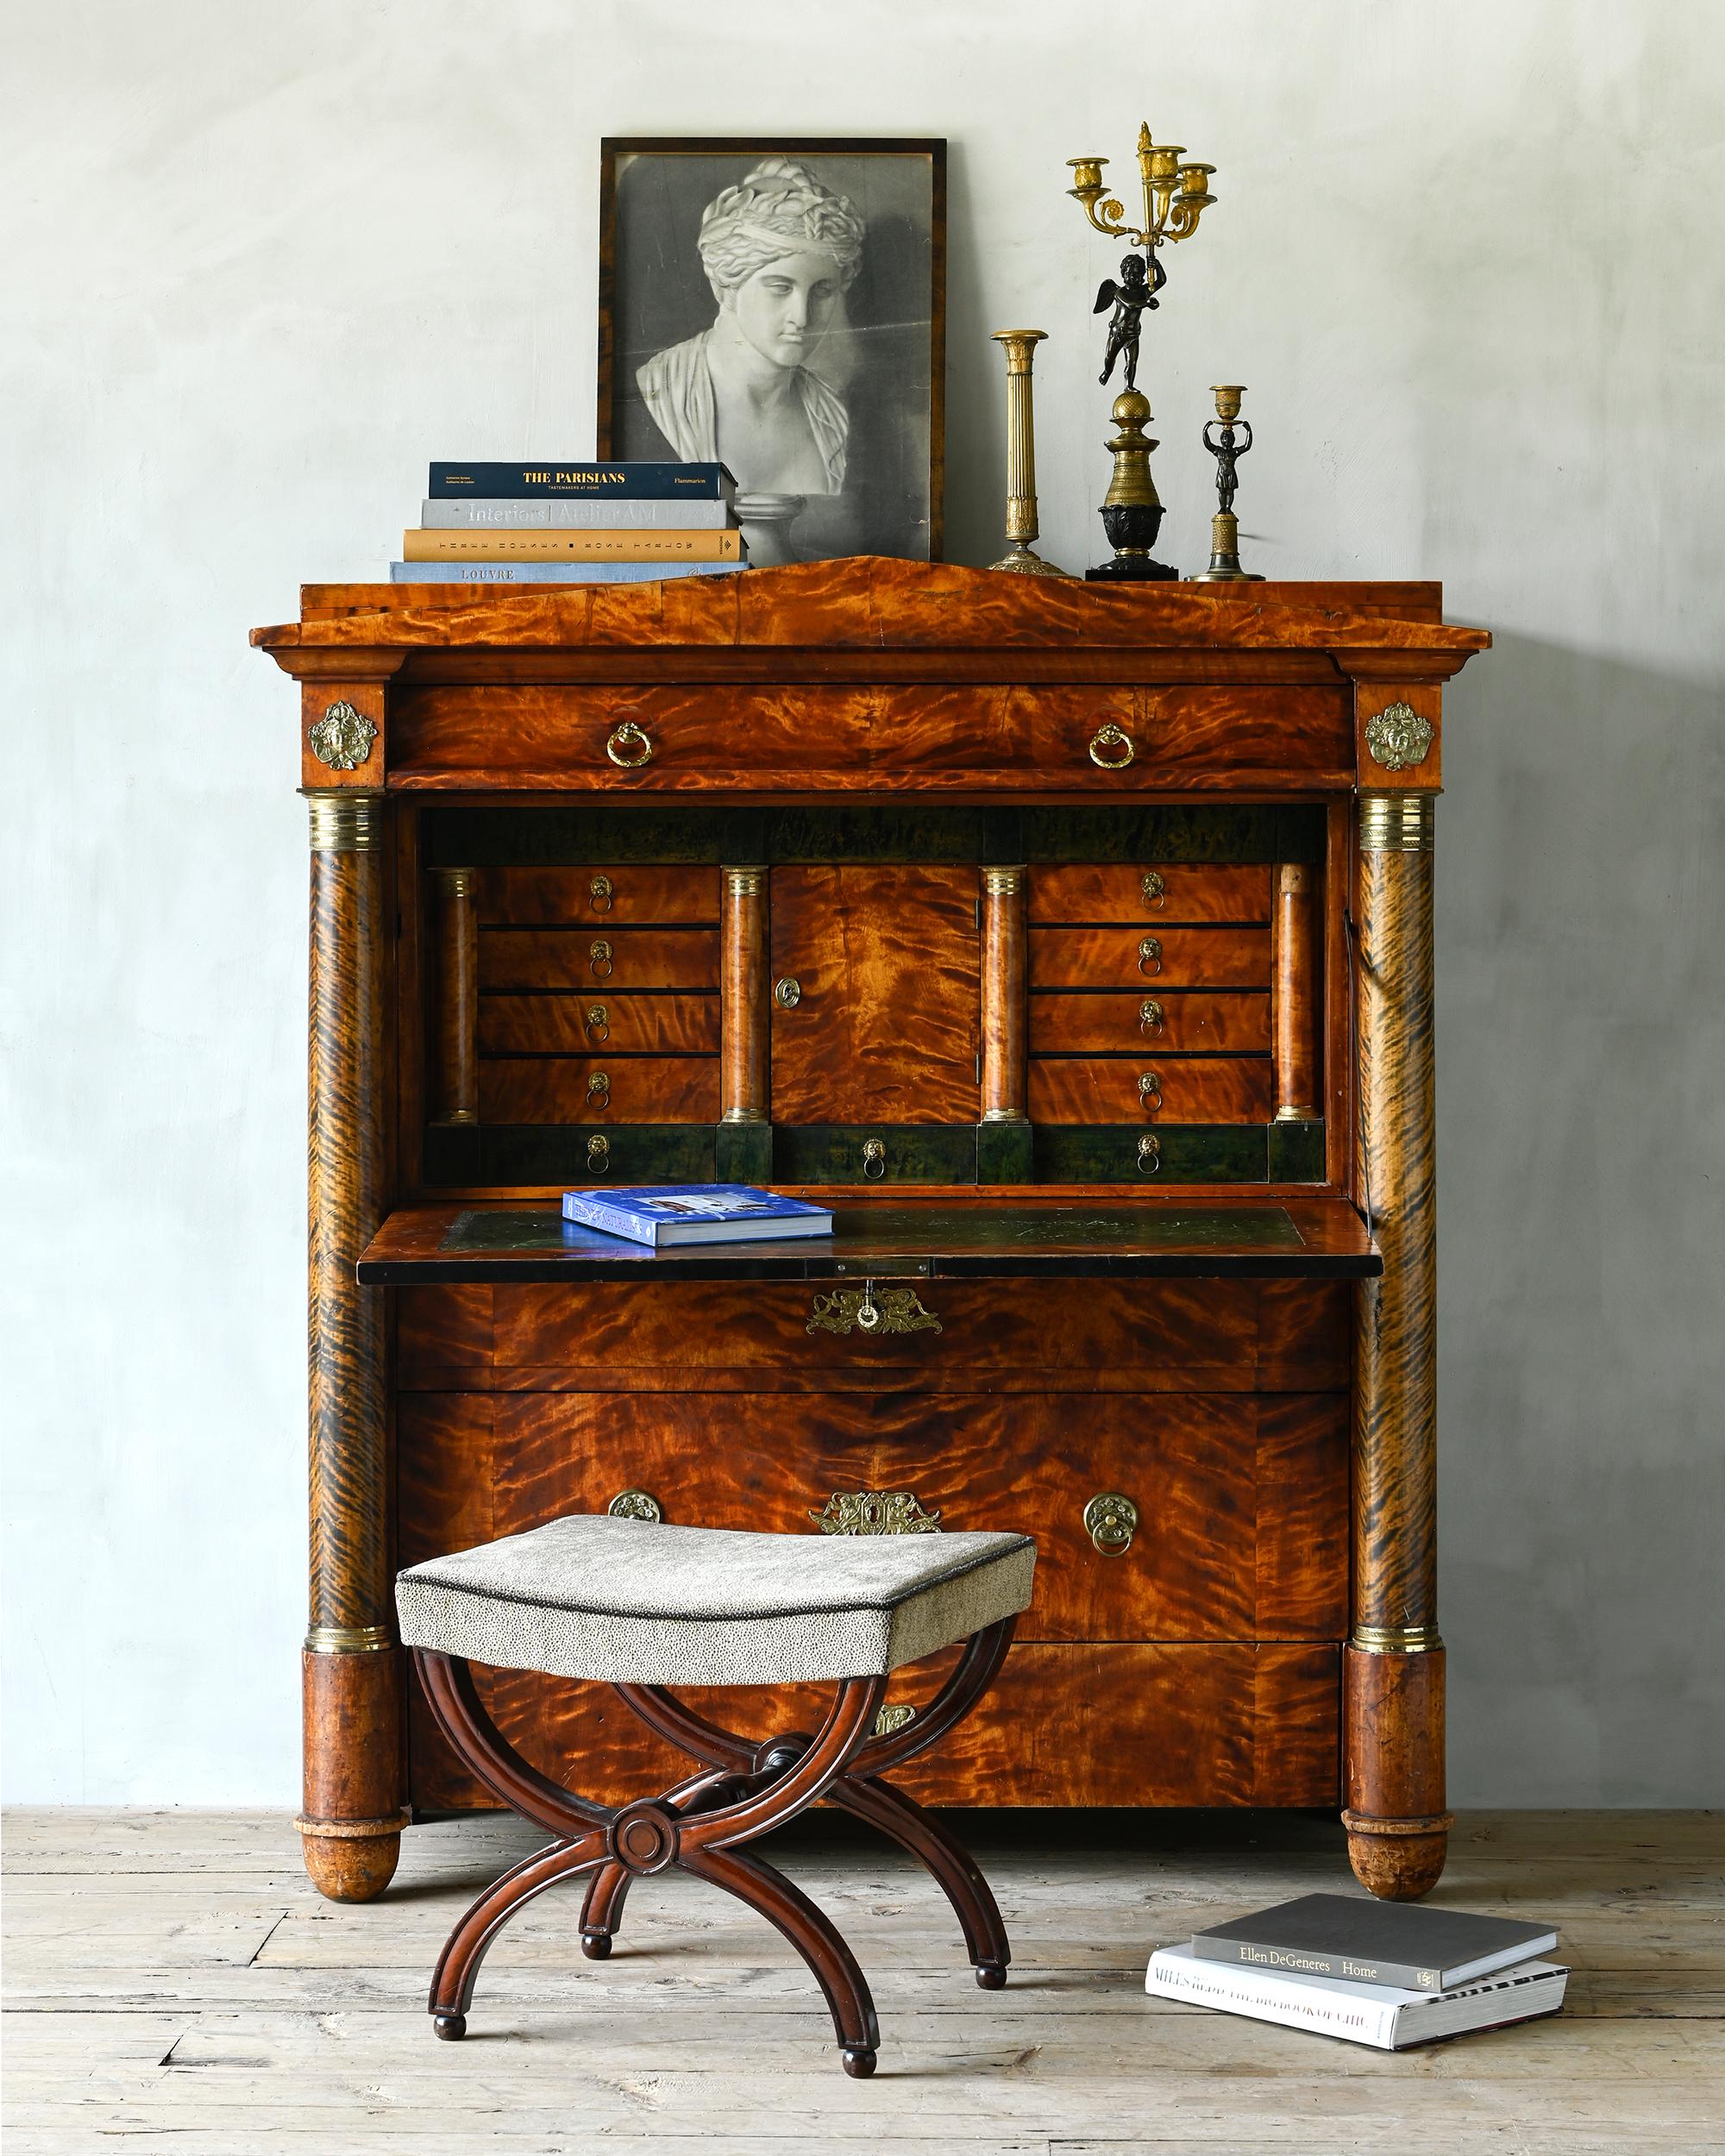 Exceptional architecturally designed 19th century Swedish Empire secretary in flame birch with great subtle patination. Exterior with a folding writing board with leather inlay and four drawers flanked by columns. Fittings of bronze and pressed